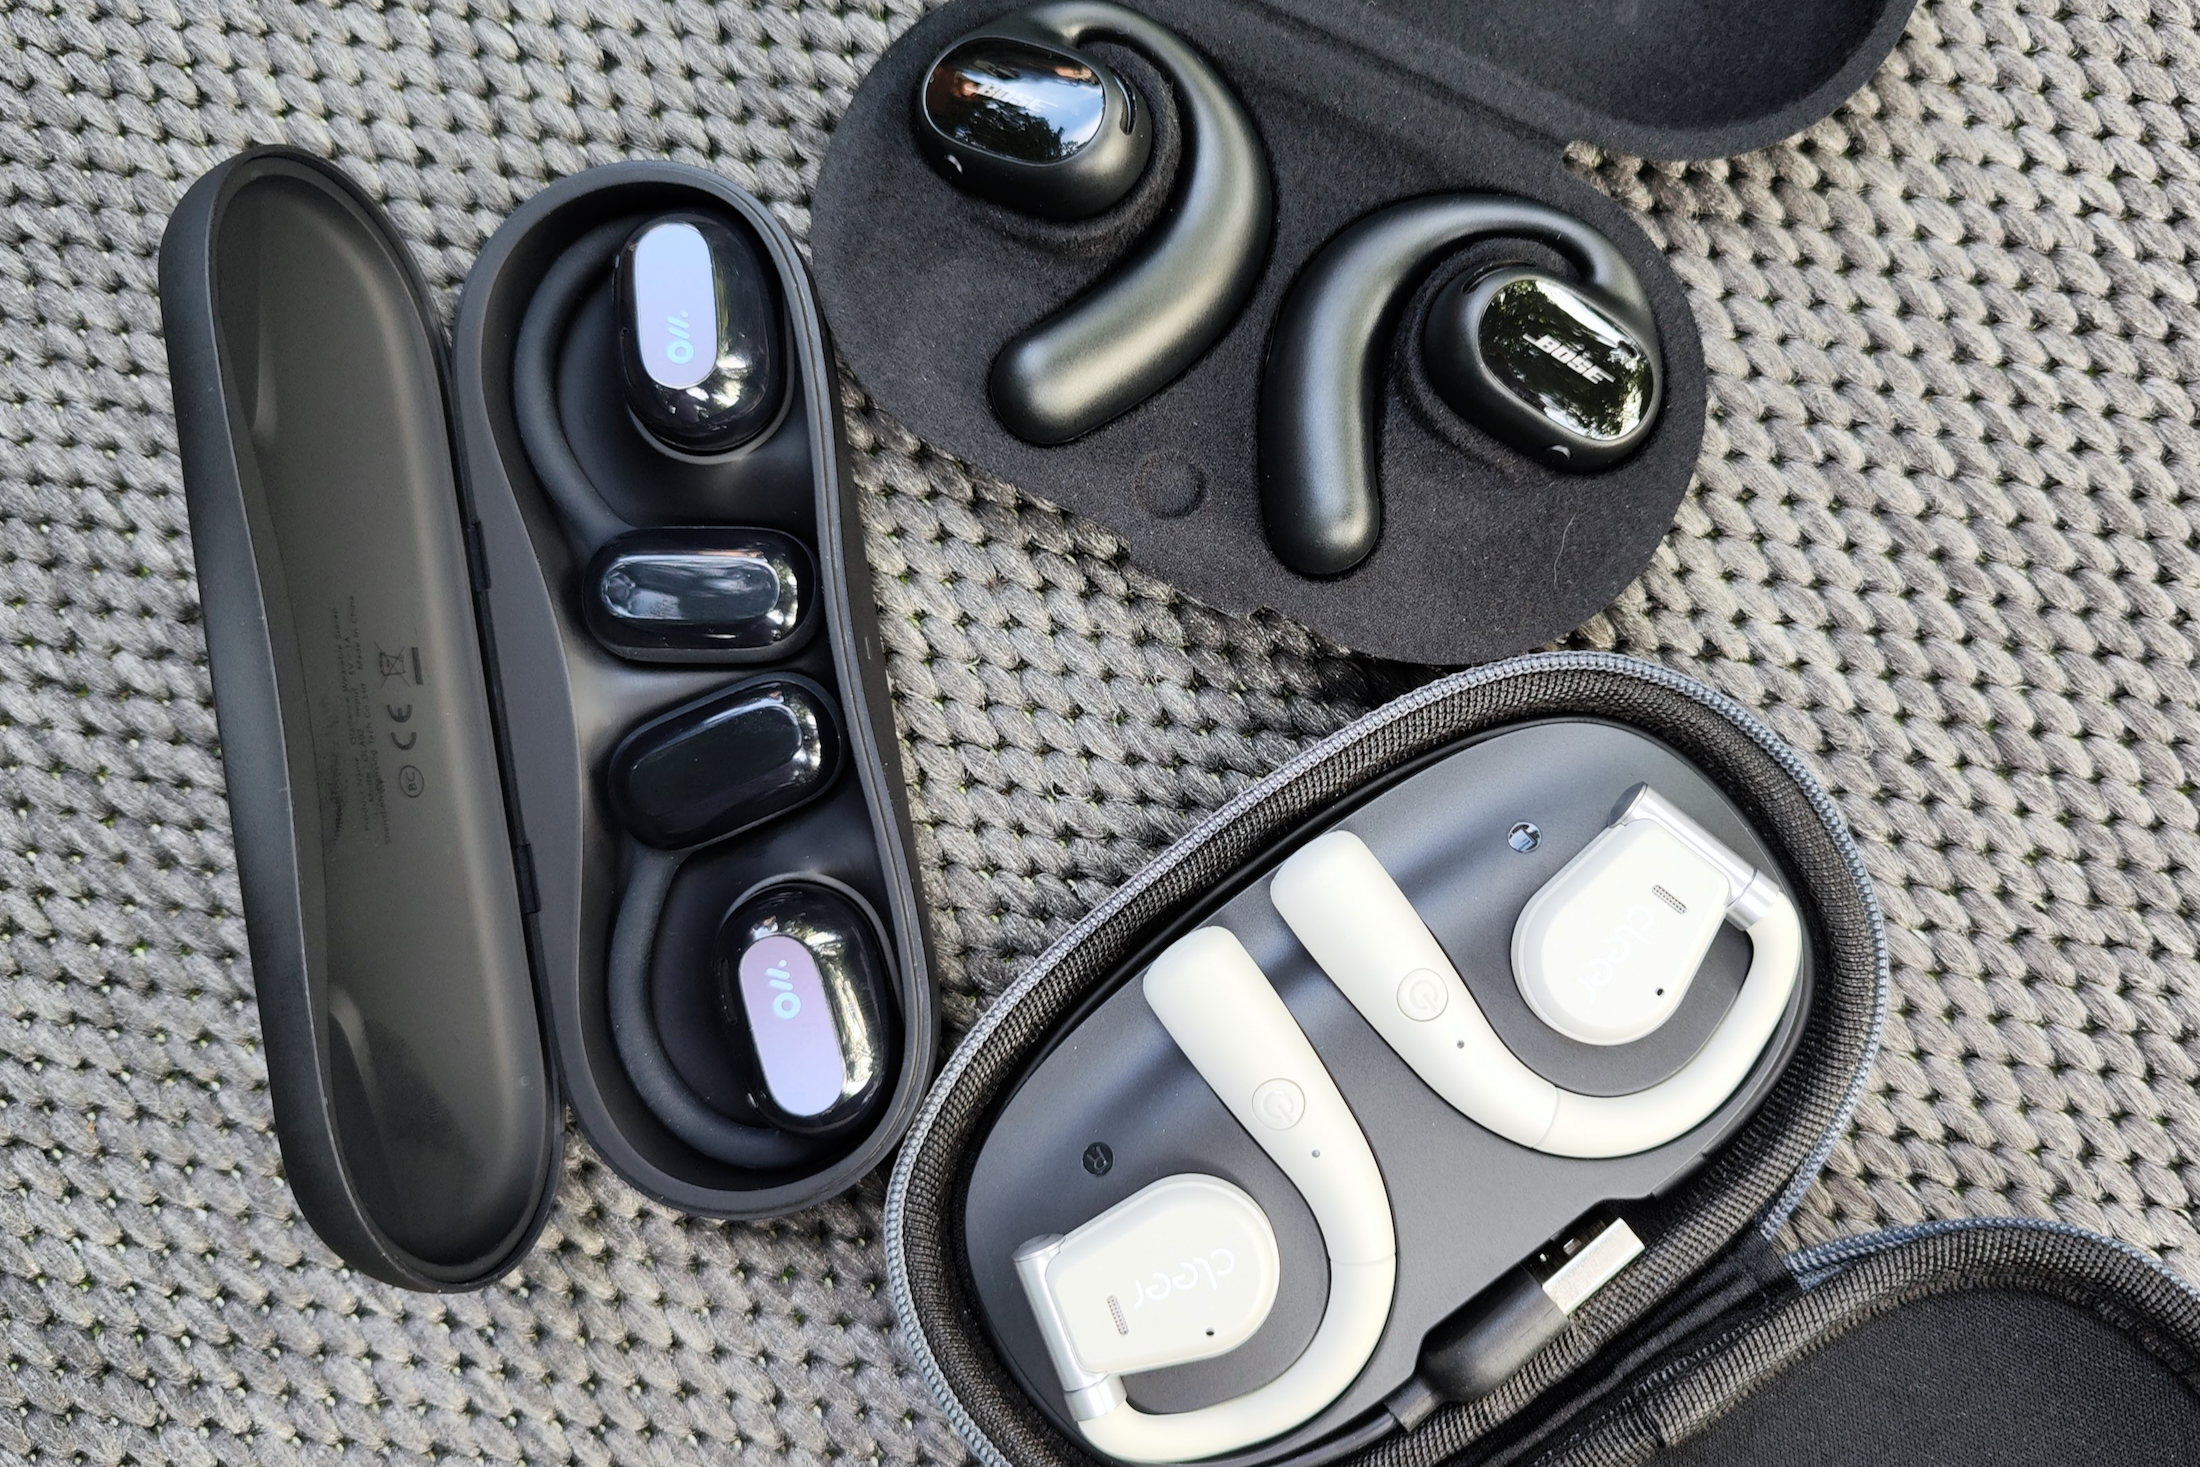 Bose's New Ultra Open Earbuds Are Coming Soon and They're Pretty Funky -  CNET